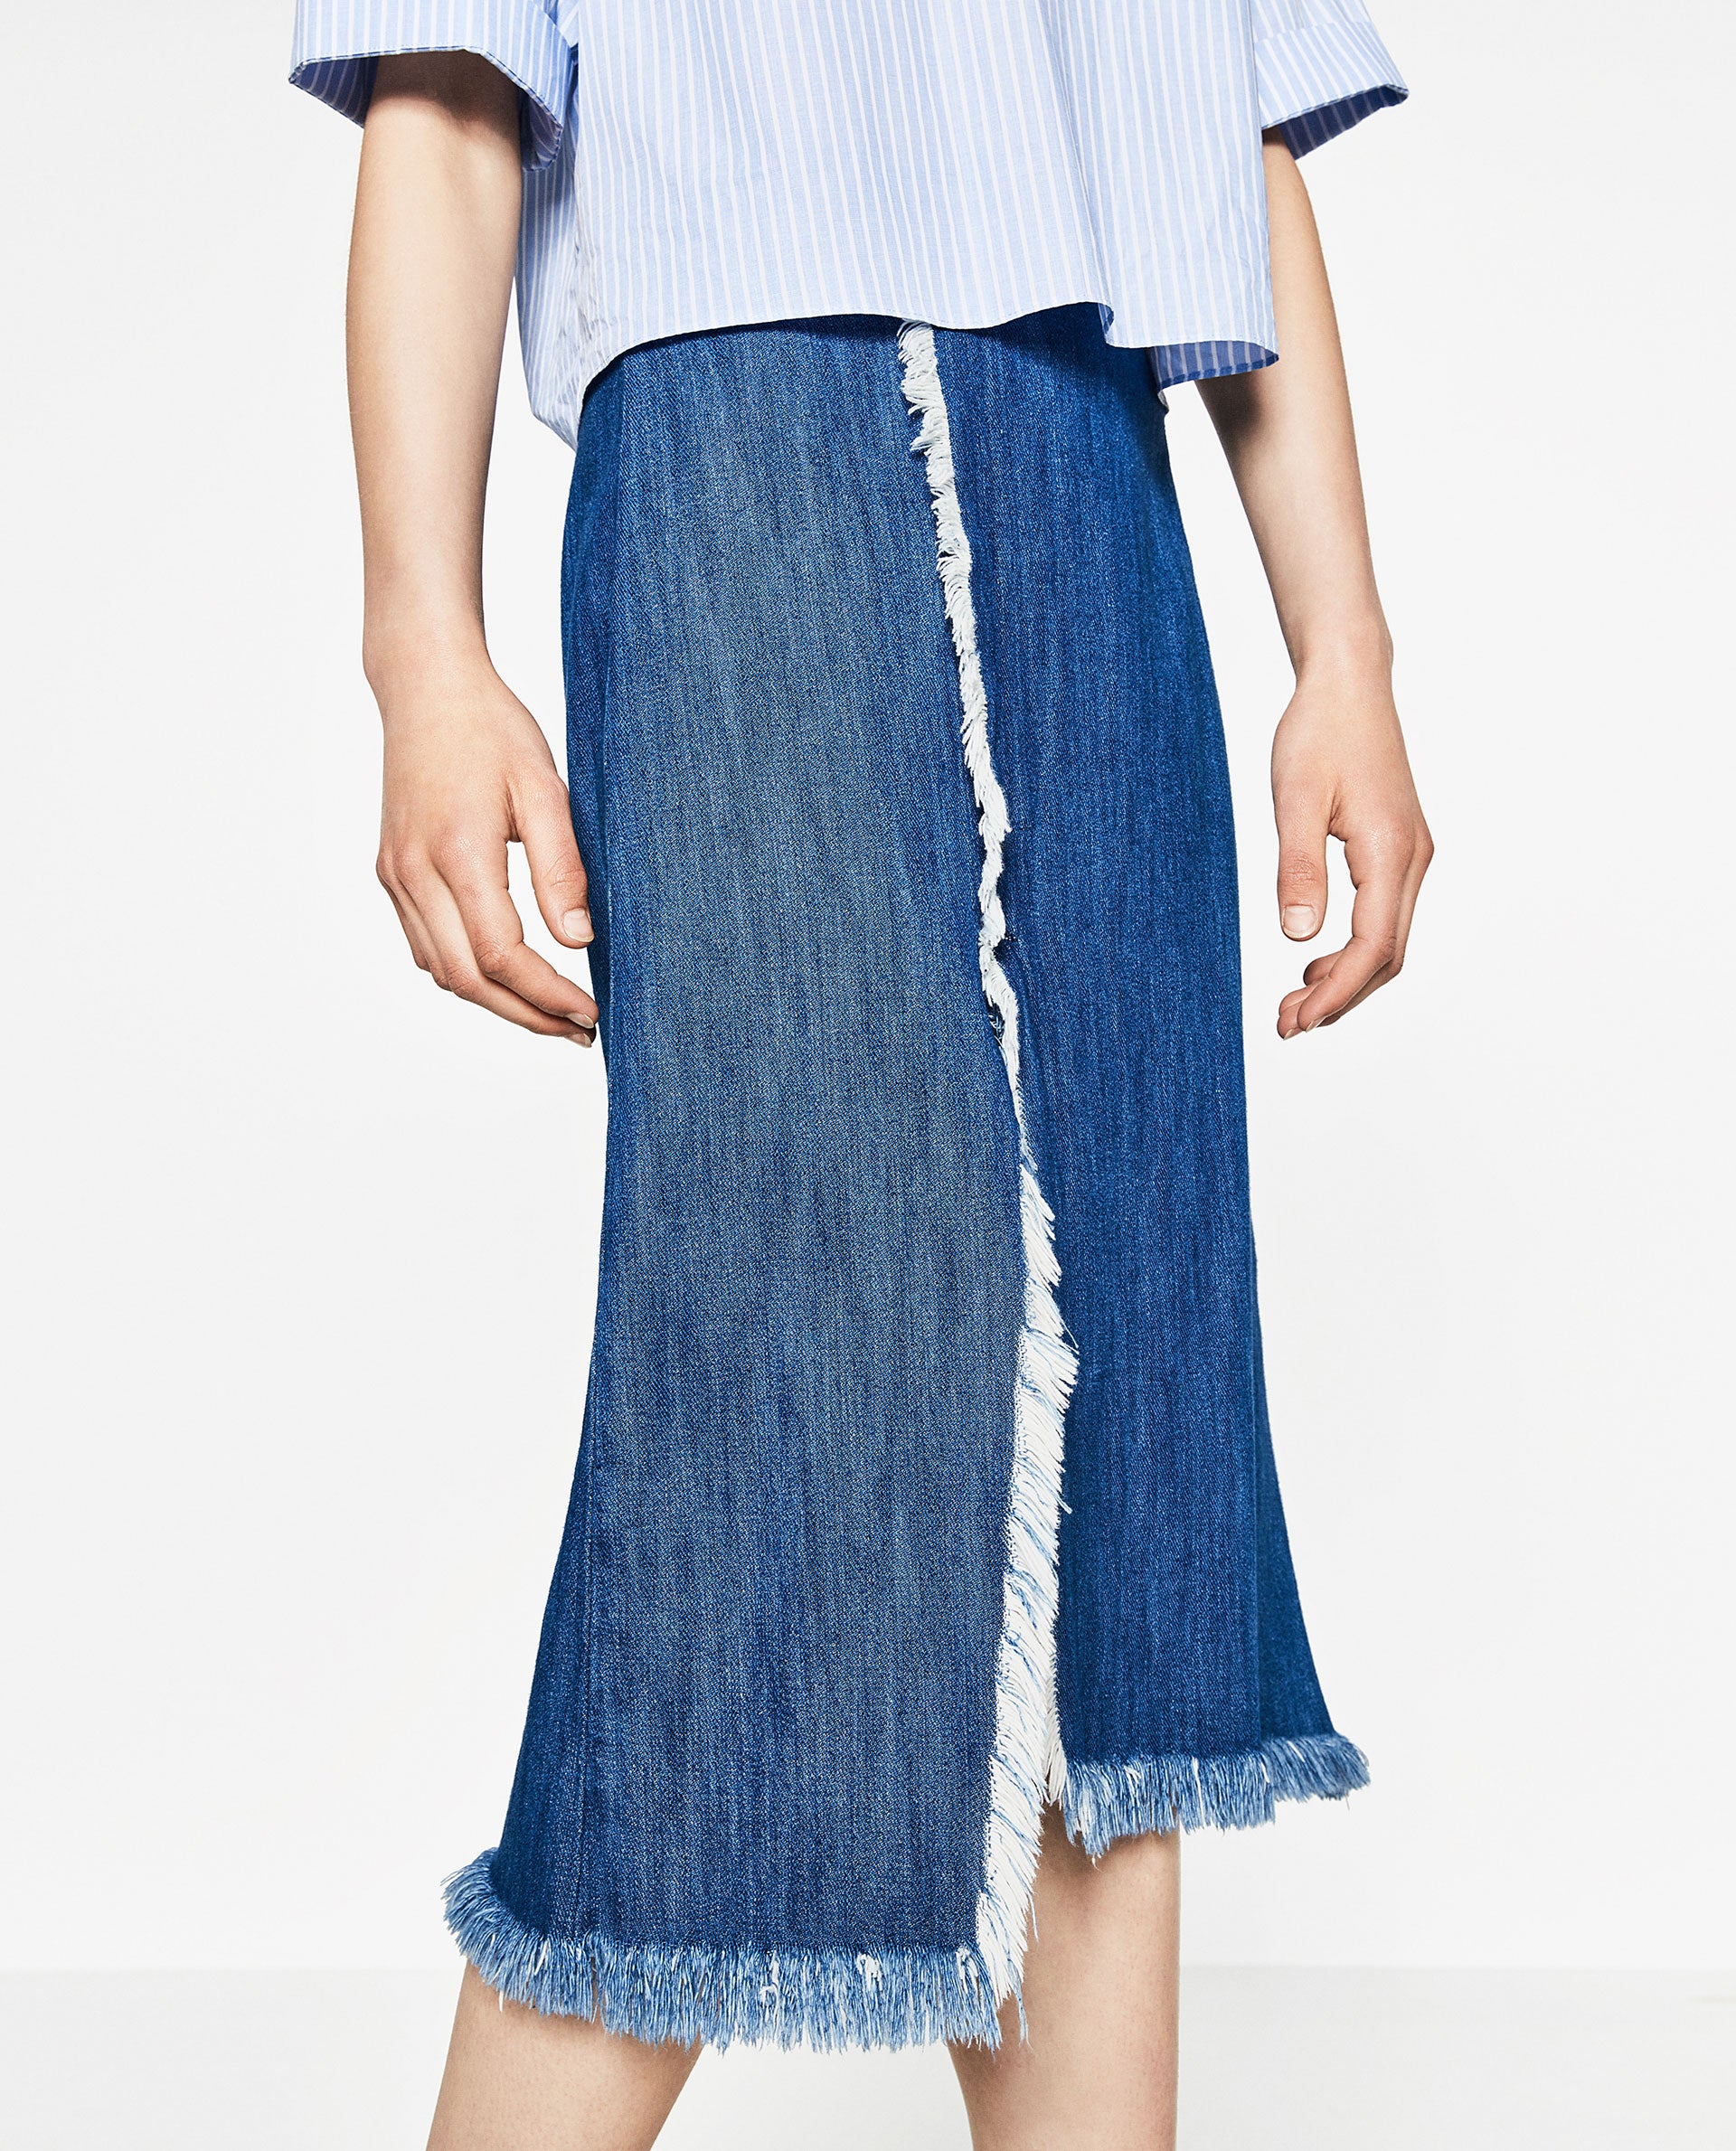 Zara is Having a Crazy Sale, Snag Our Top Picks Before They're Gone!
